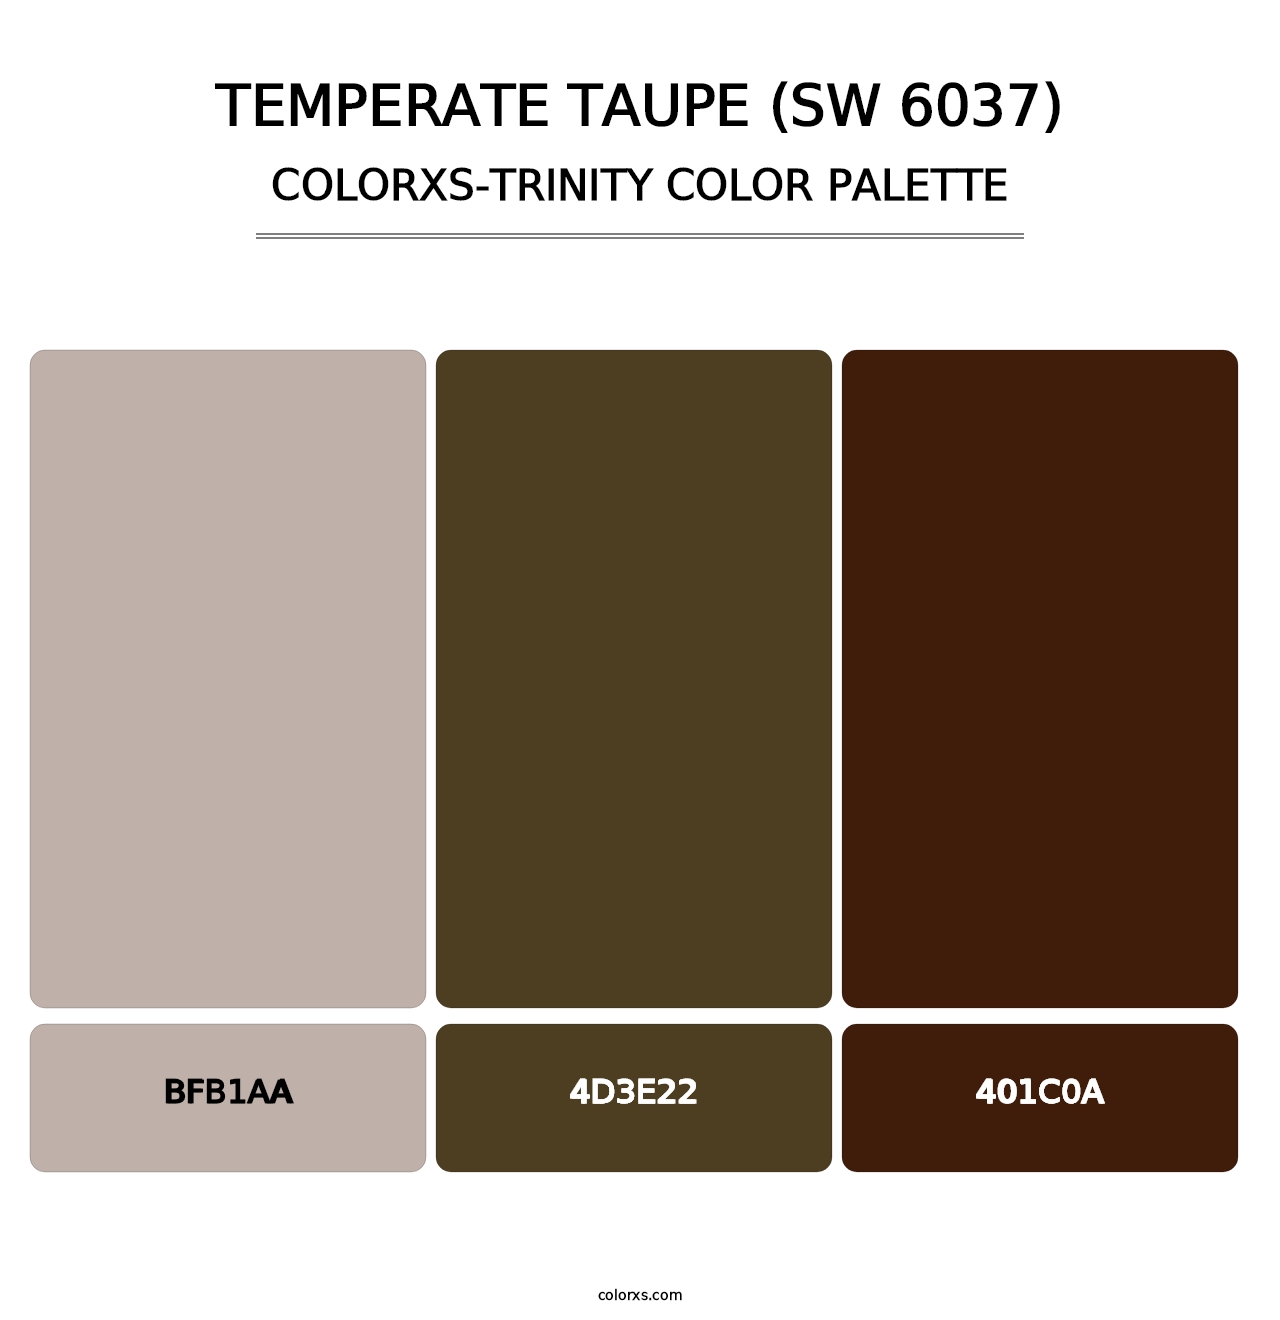 Temperate Taupe (SW 6037) - Colorxs Trinity Palette